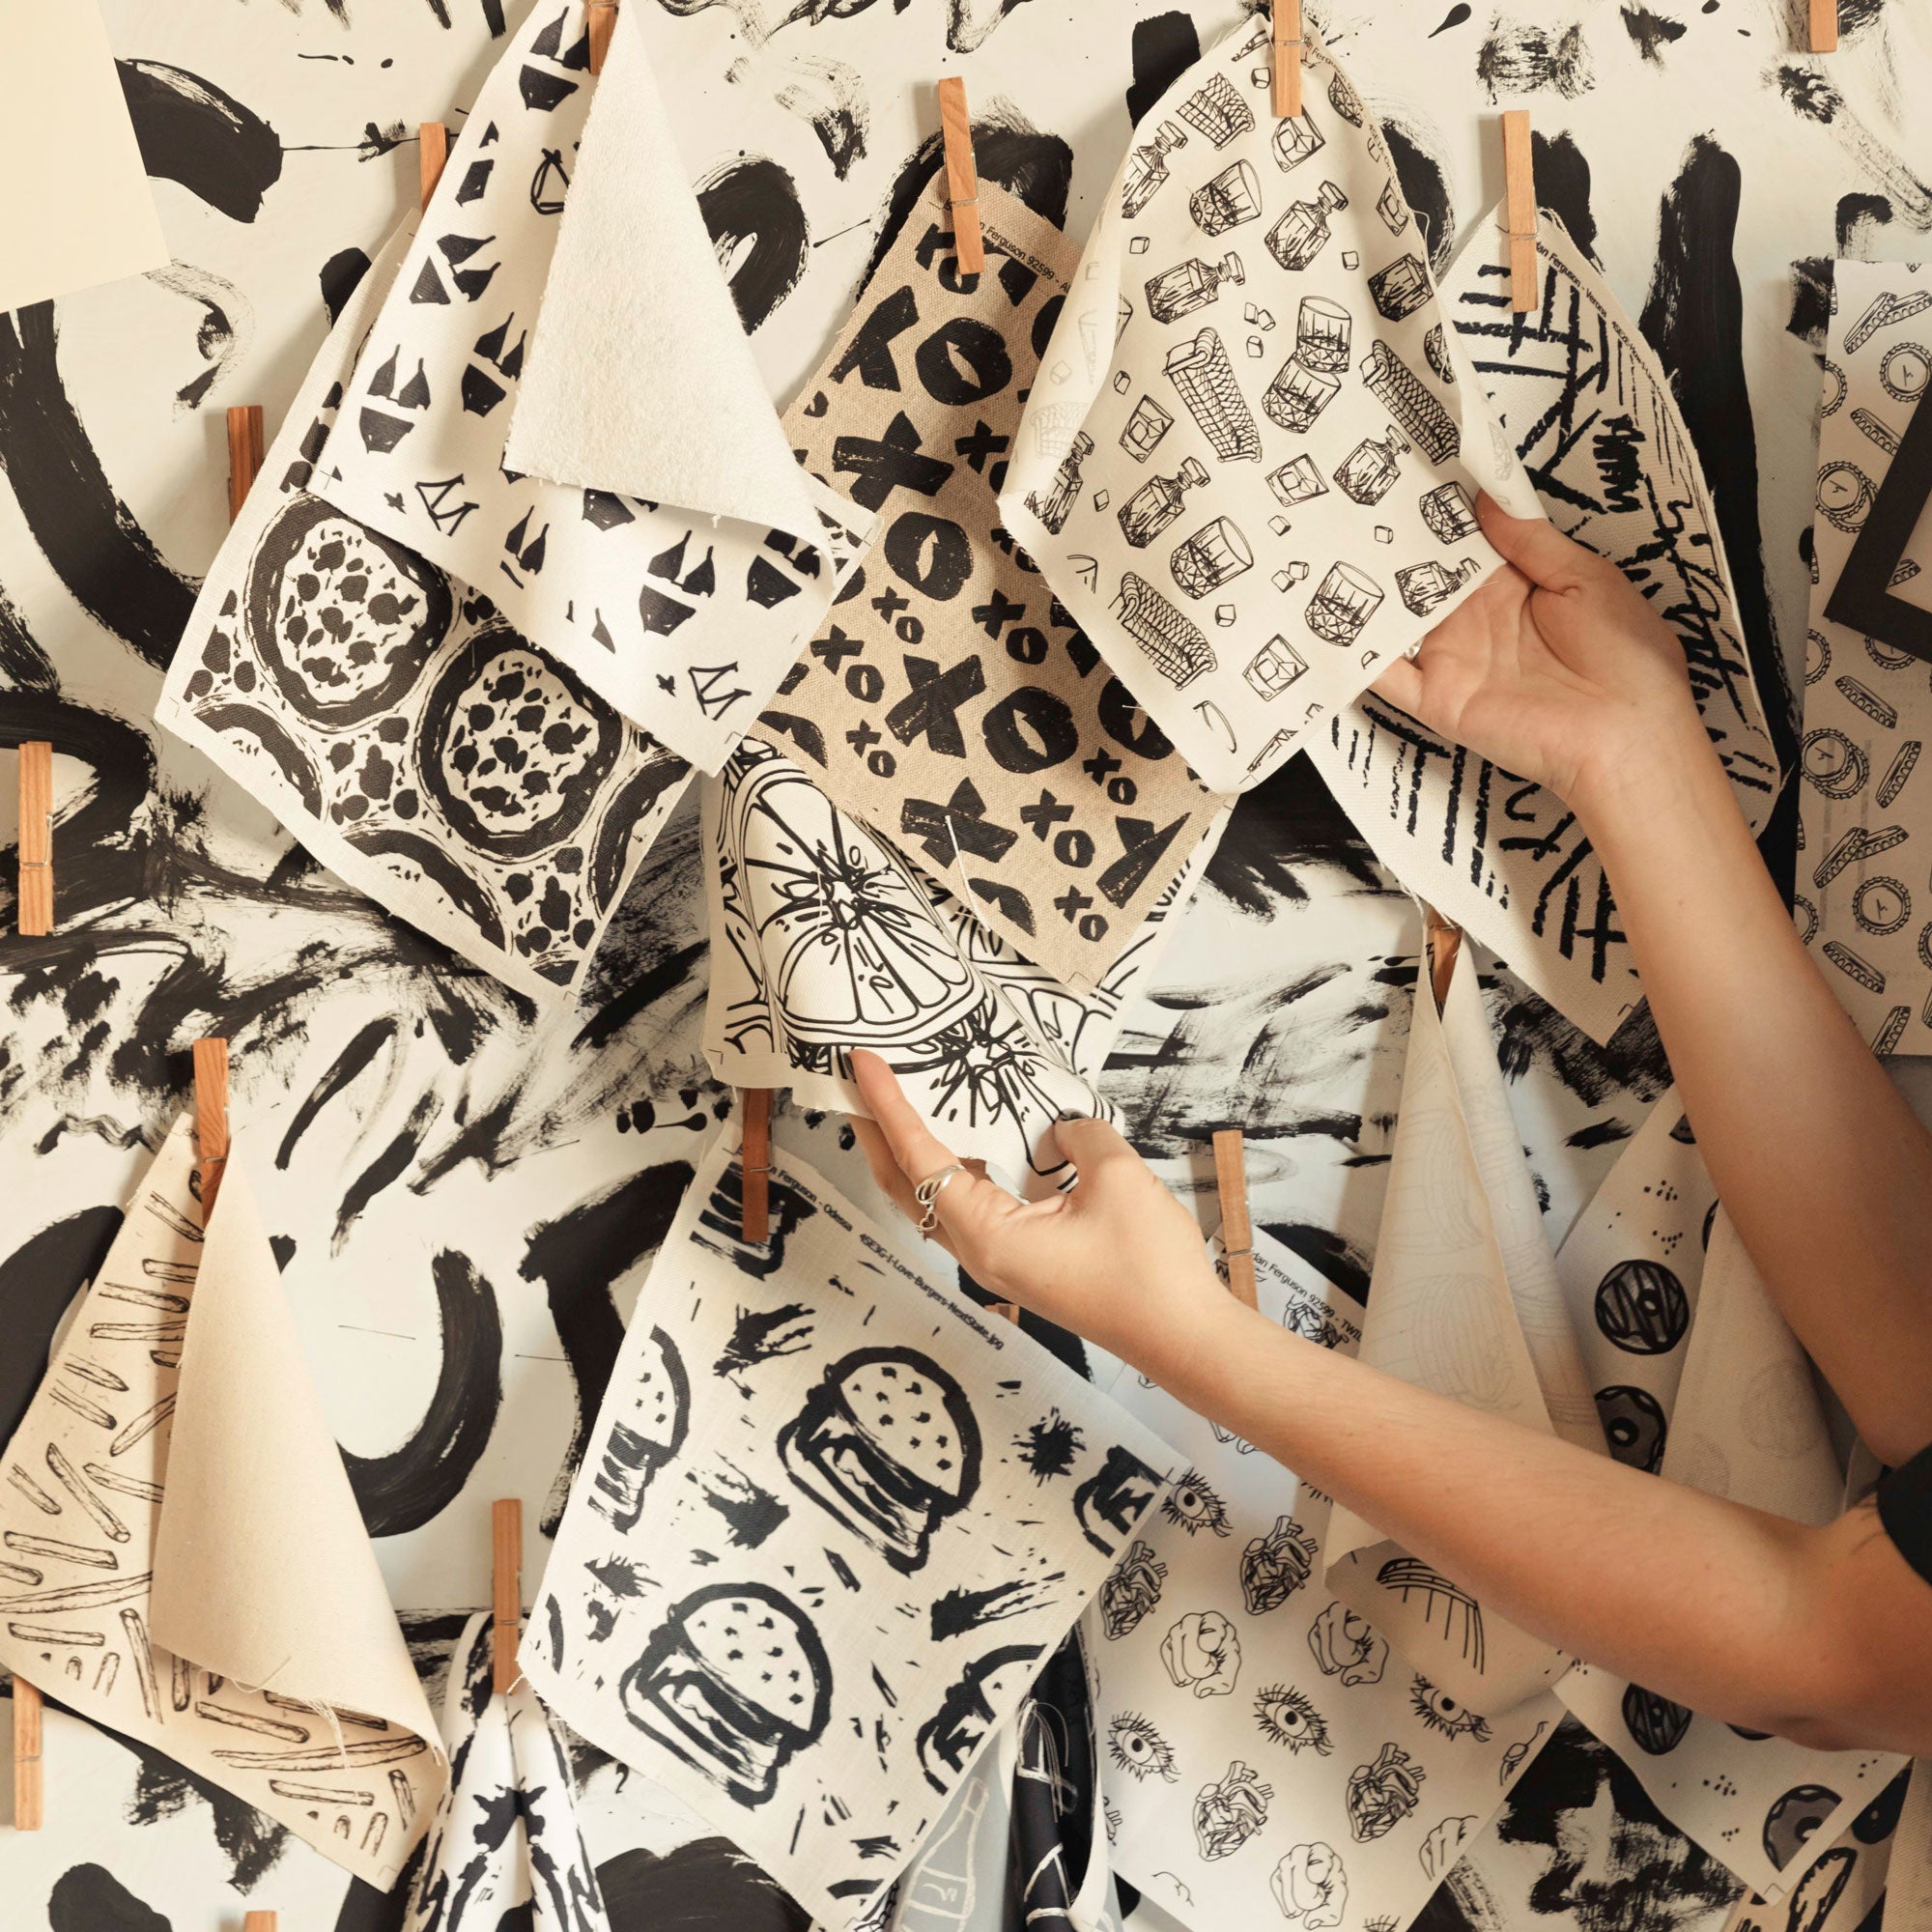 Repeat Pattern Fabric Samples By Sheridan Eveline Designer And Illustrator